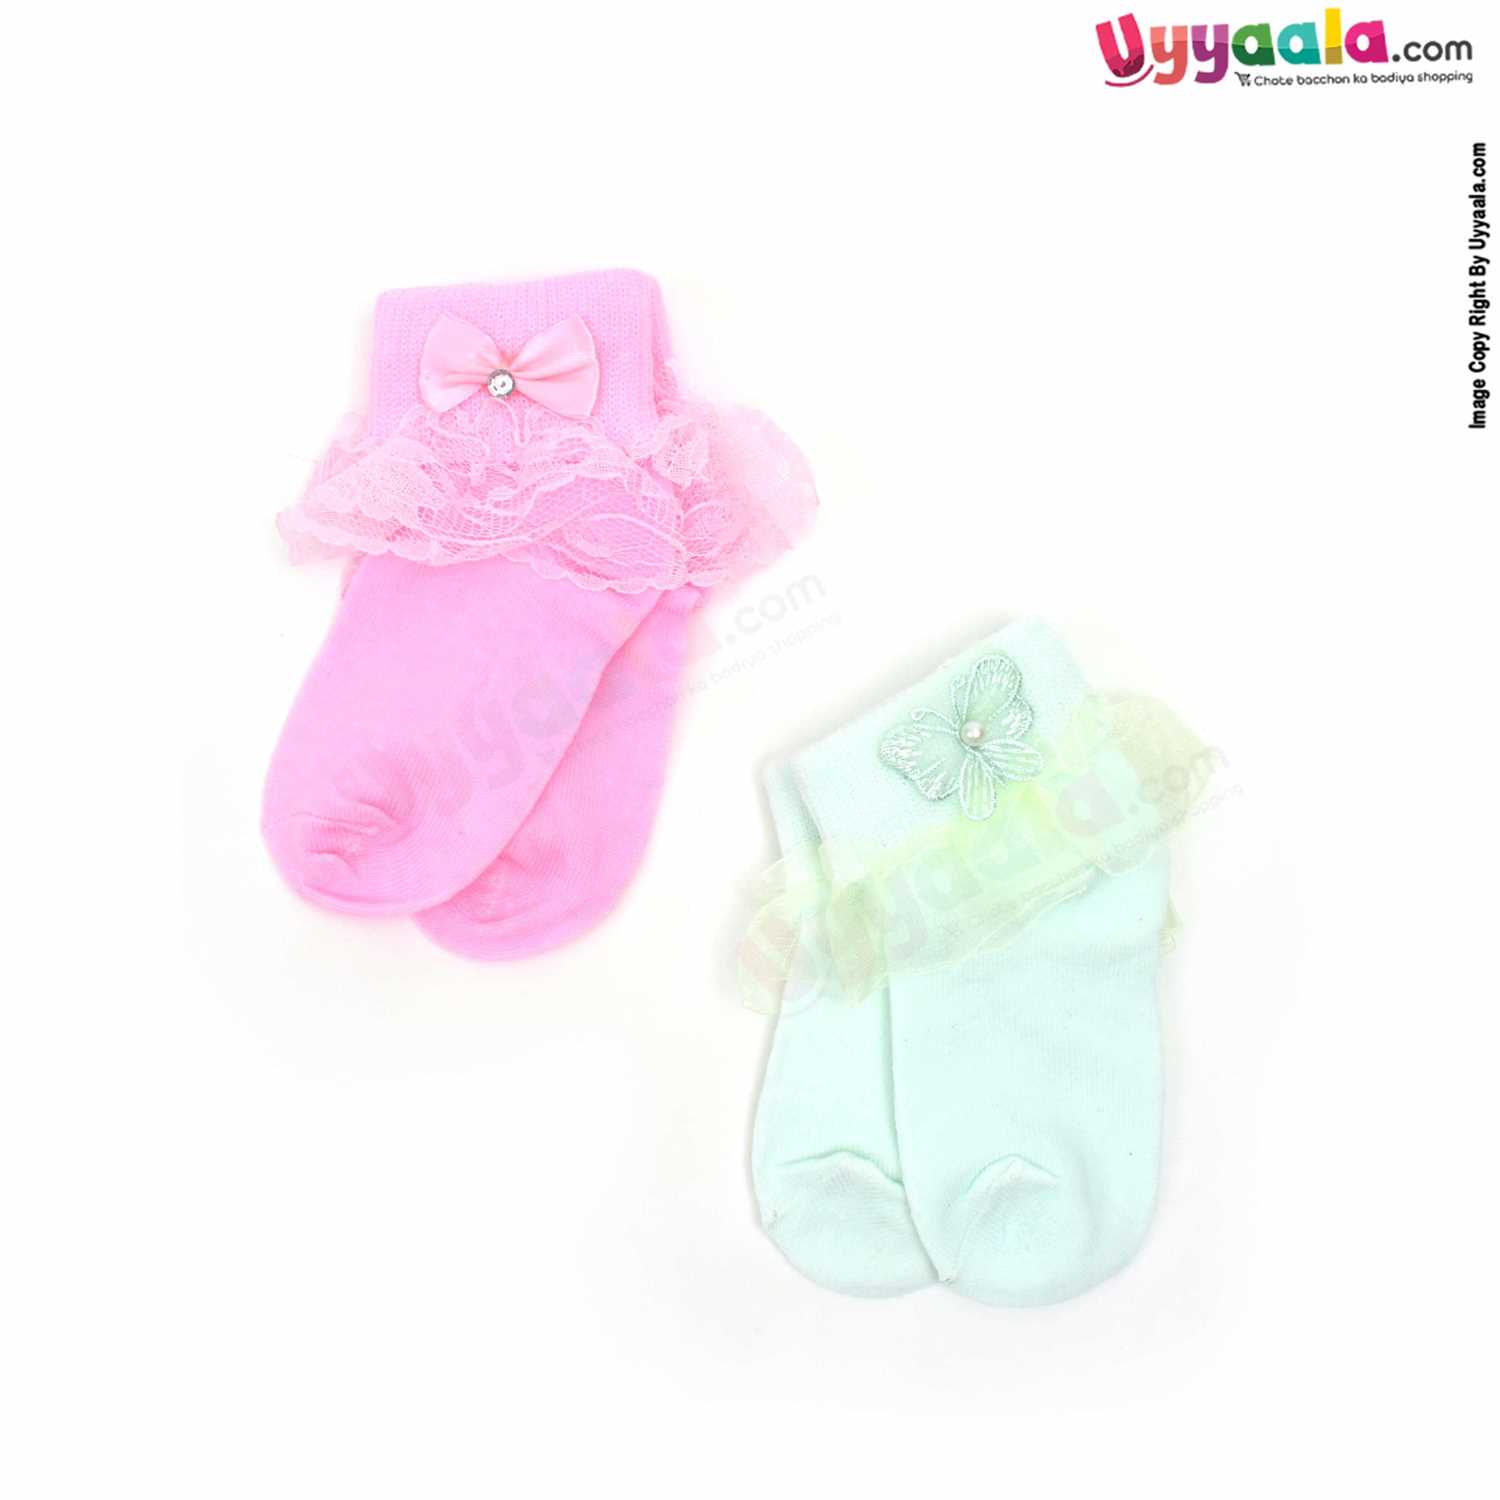 Hosiery Cotton Socks for Baby Girl Pack of 2, 6-18m Age - Pink & Light Green